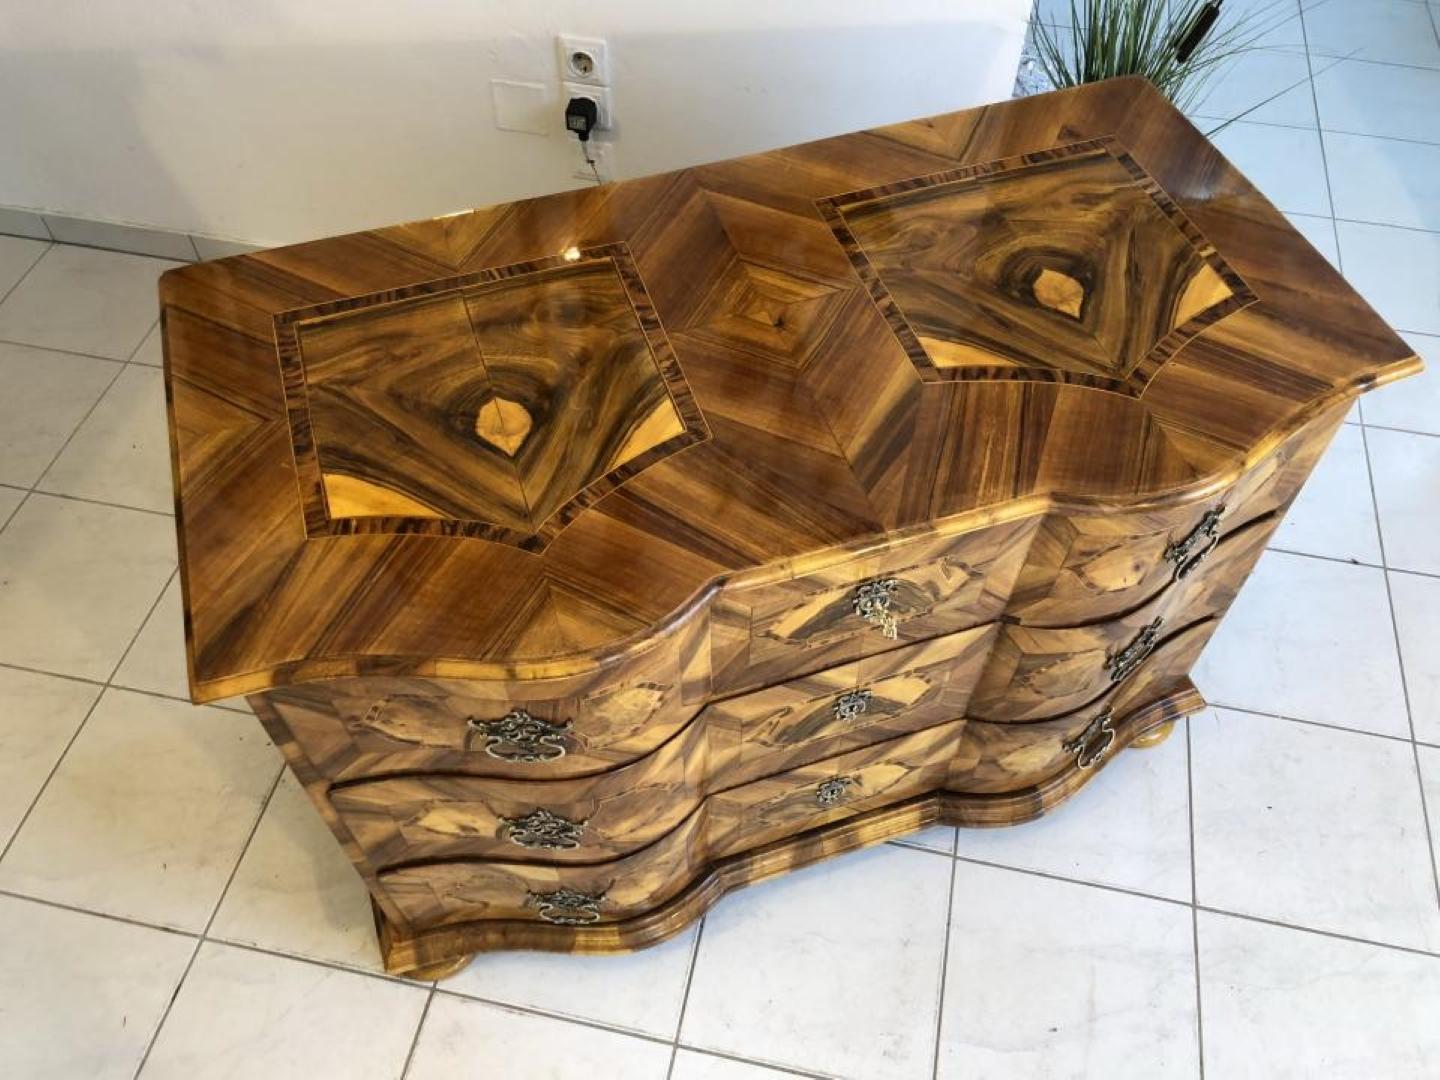 Magnificent Baroque chest of drawers with stunning marquetry work and brass handles on the front.
This is a very beautiful inlay work modern Baroque commode with three curved drawers.
Features symmetrical veneer patterns and a high gloss polished